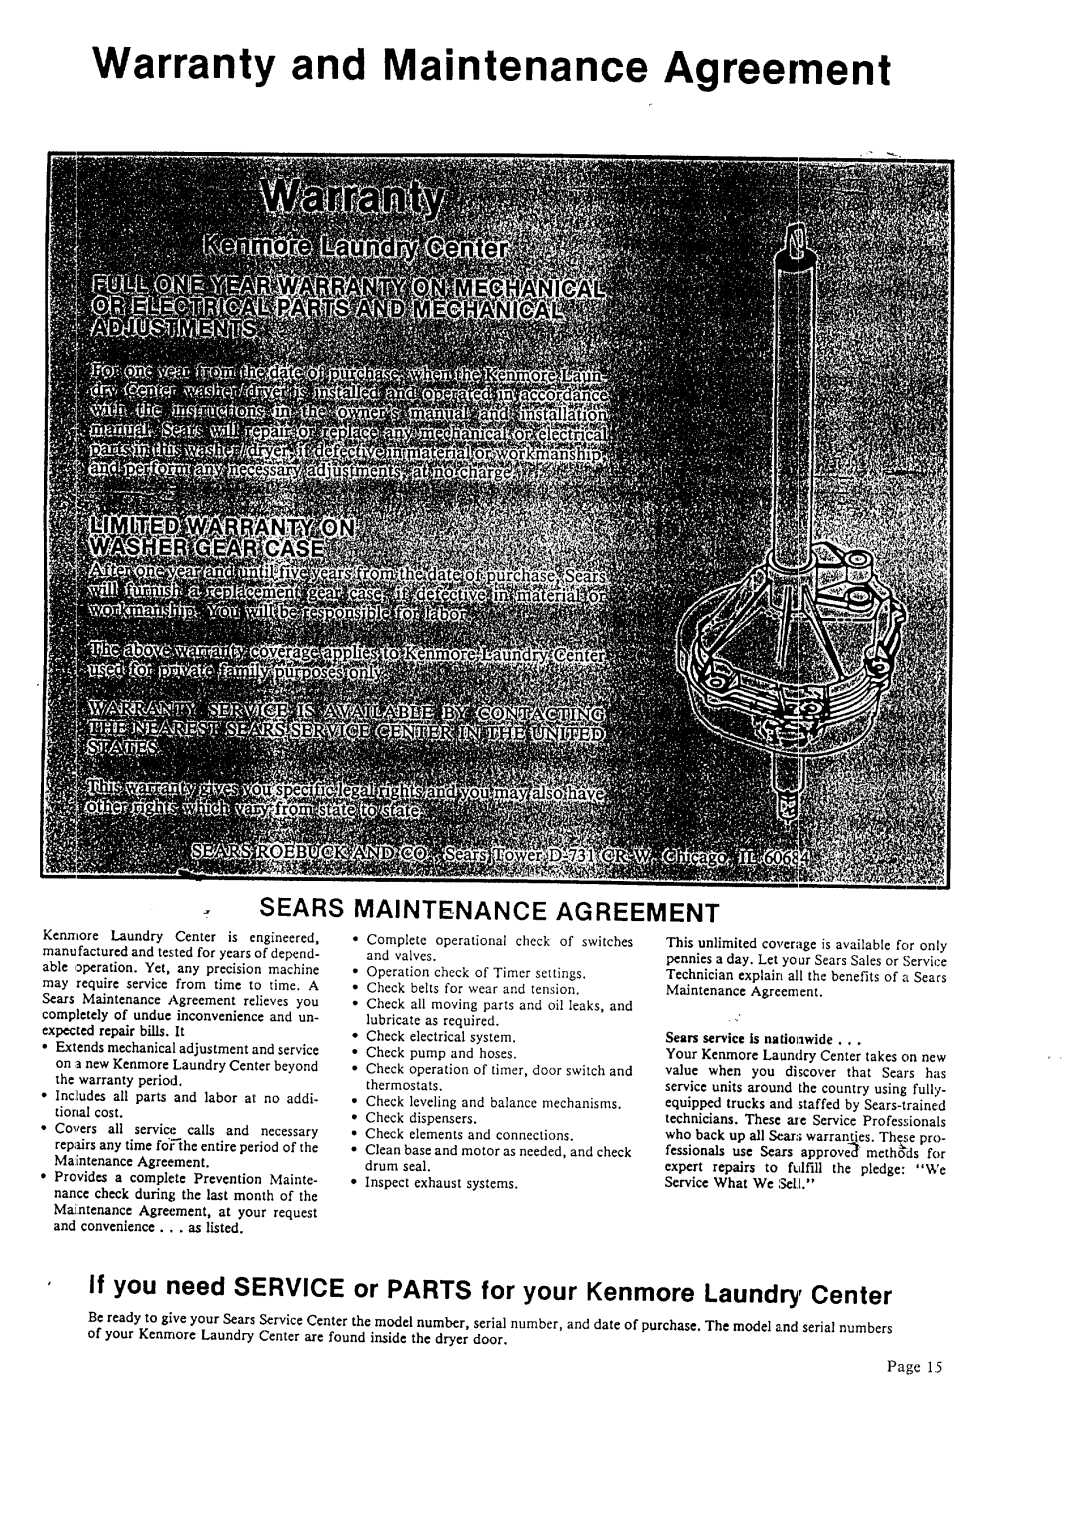 Sears 93751 Warranty and Maintenance Agreement, Sears, If you need SERVICE or PARTS for your Kenmore Laundry, Center 